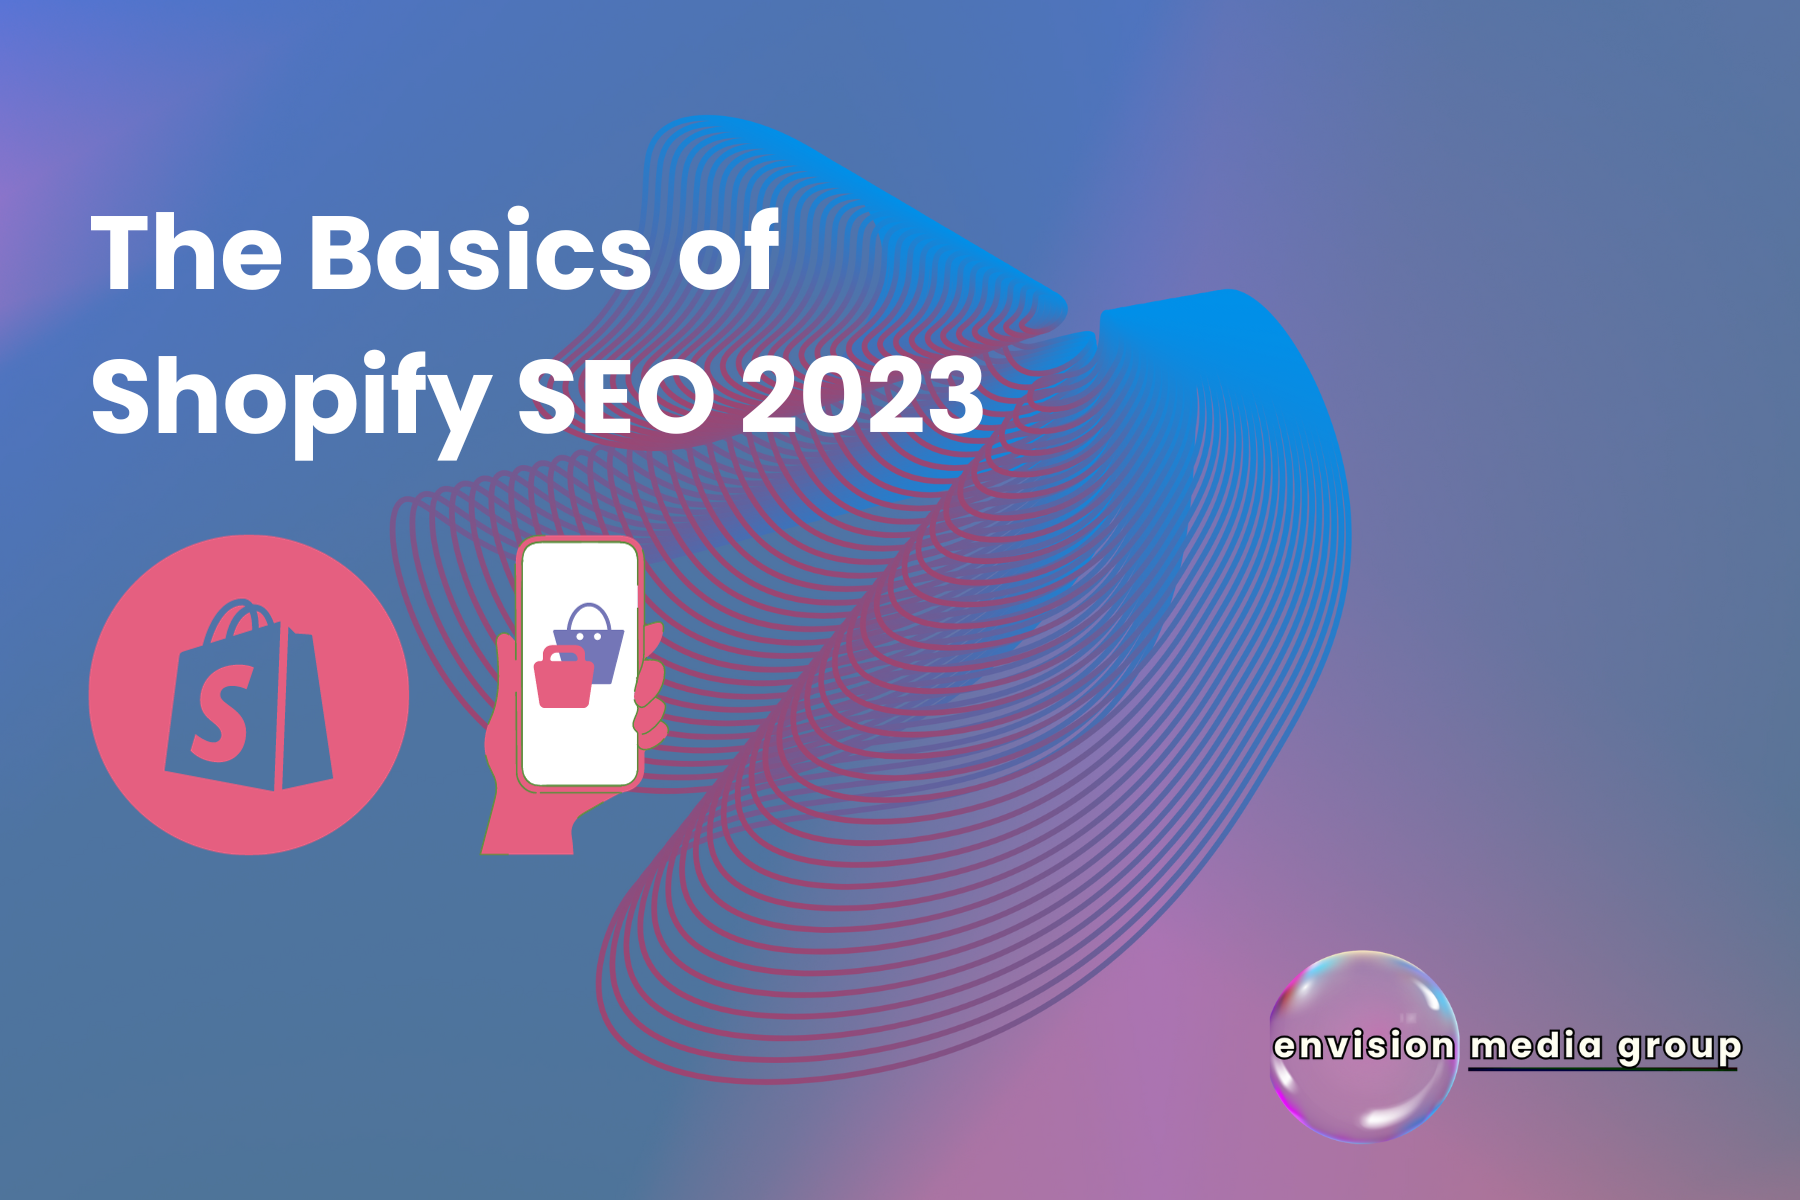 Shopify SEO 2023 strategies by Envision Media Group, top New Jersey agency.